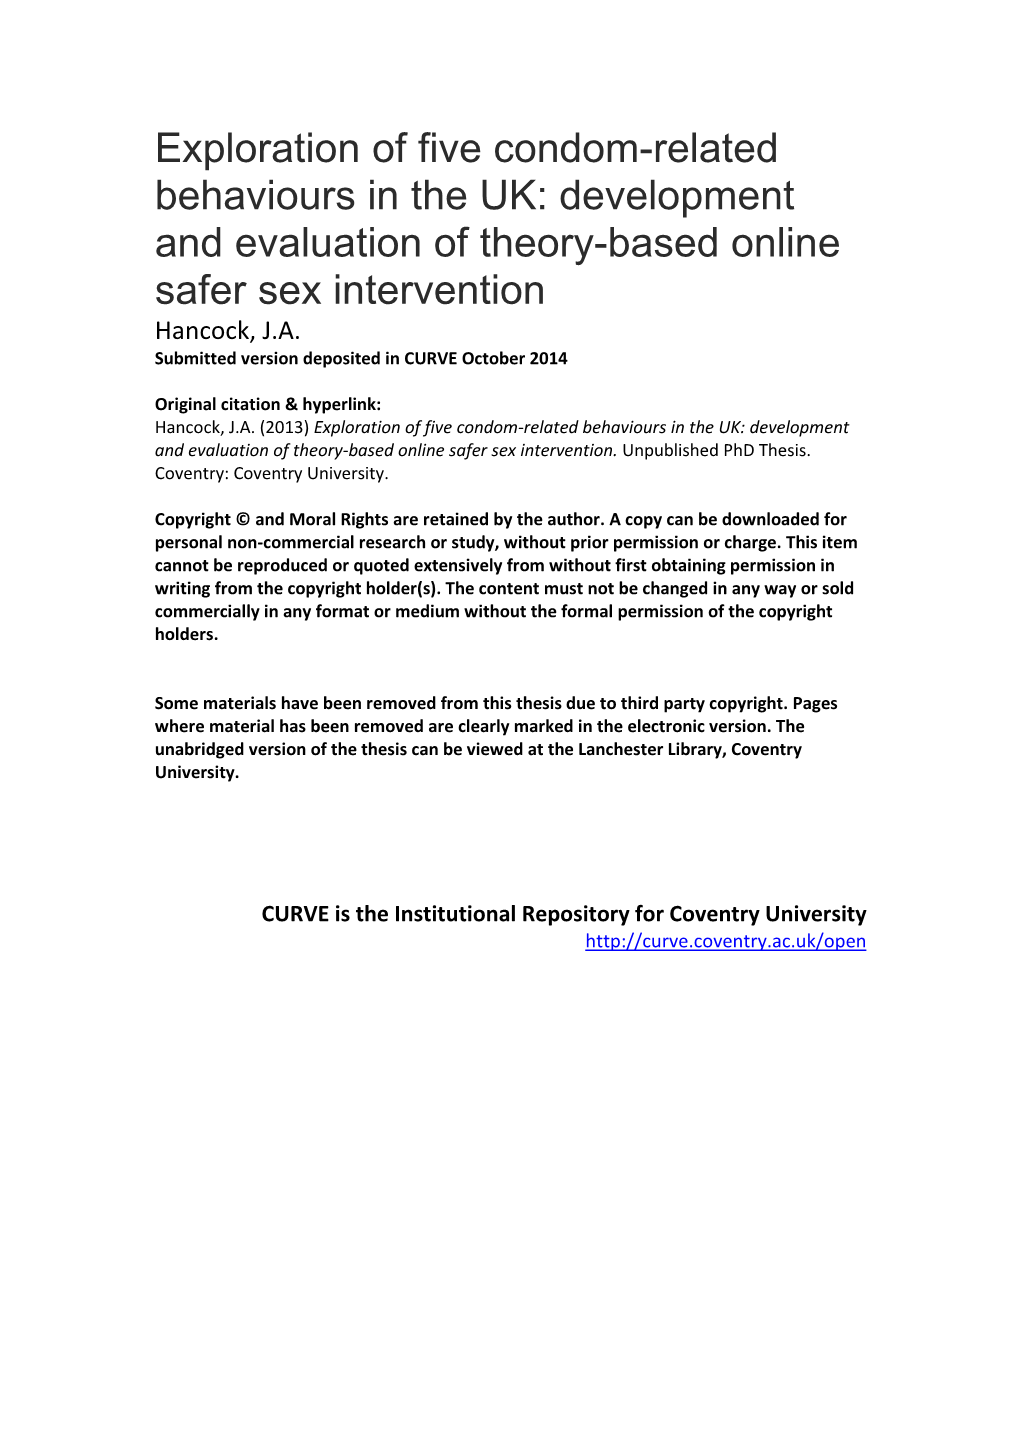 Exploration of Five Condom-Related Behaviours in the UK: Development and Evaluation of Theory-Based Online Safer Sex Intervention Hancock, J.A